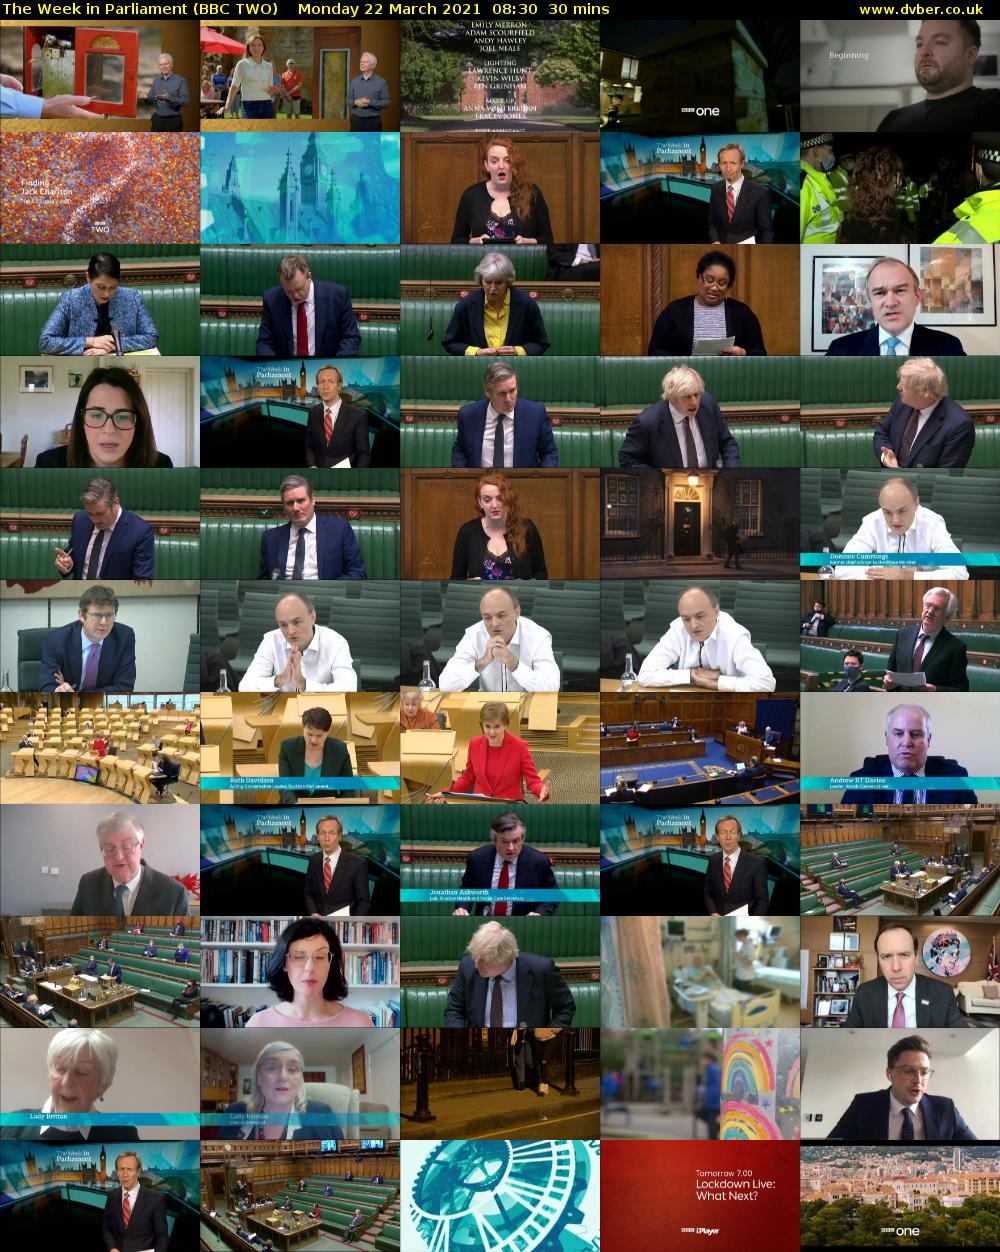 The Week in Parliament (BBC TWO) Monday 22 March 2021 08:30 - 09:00